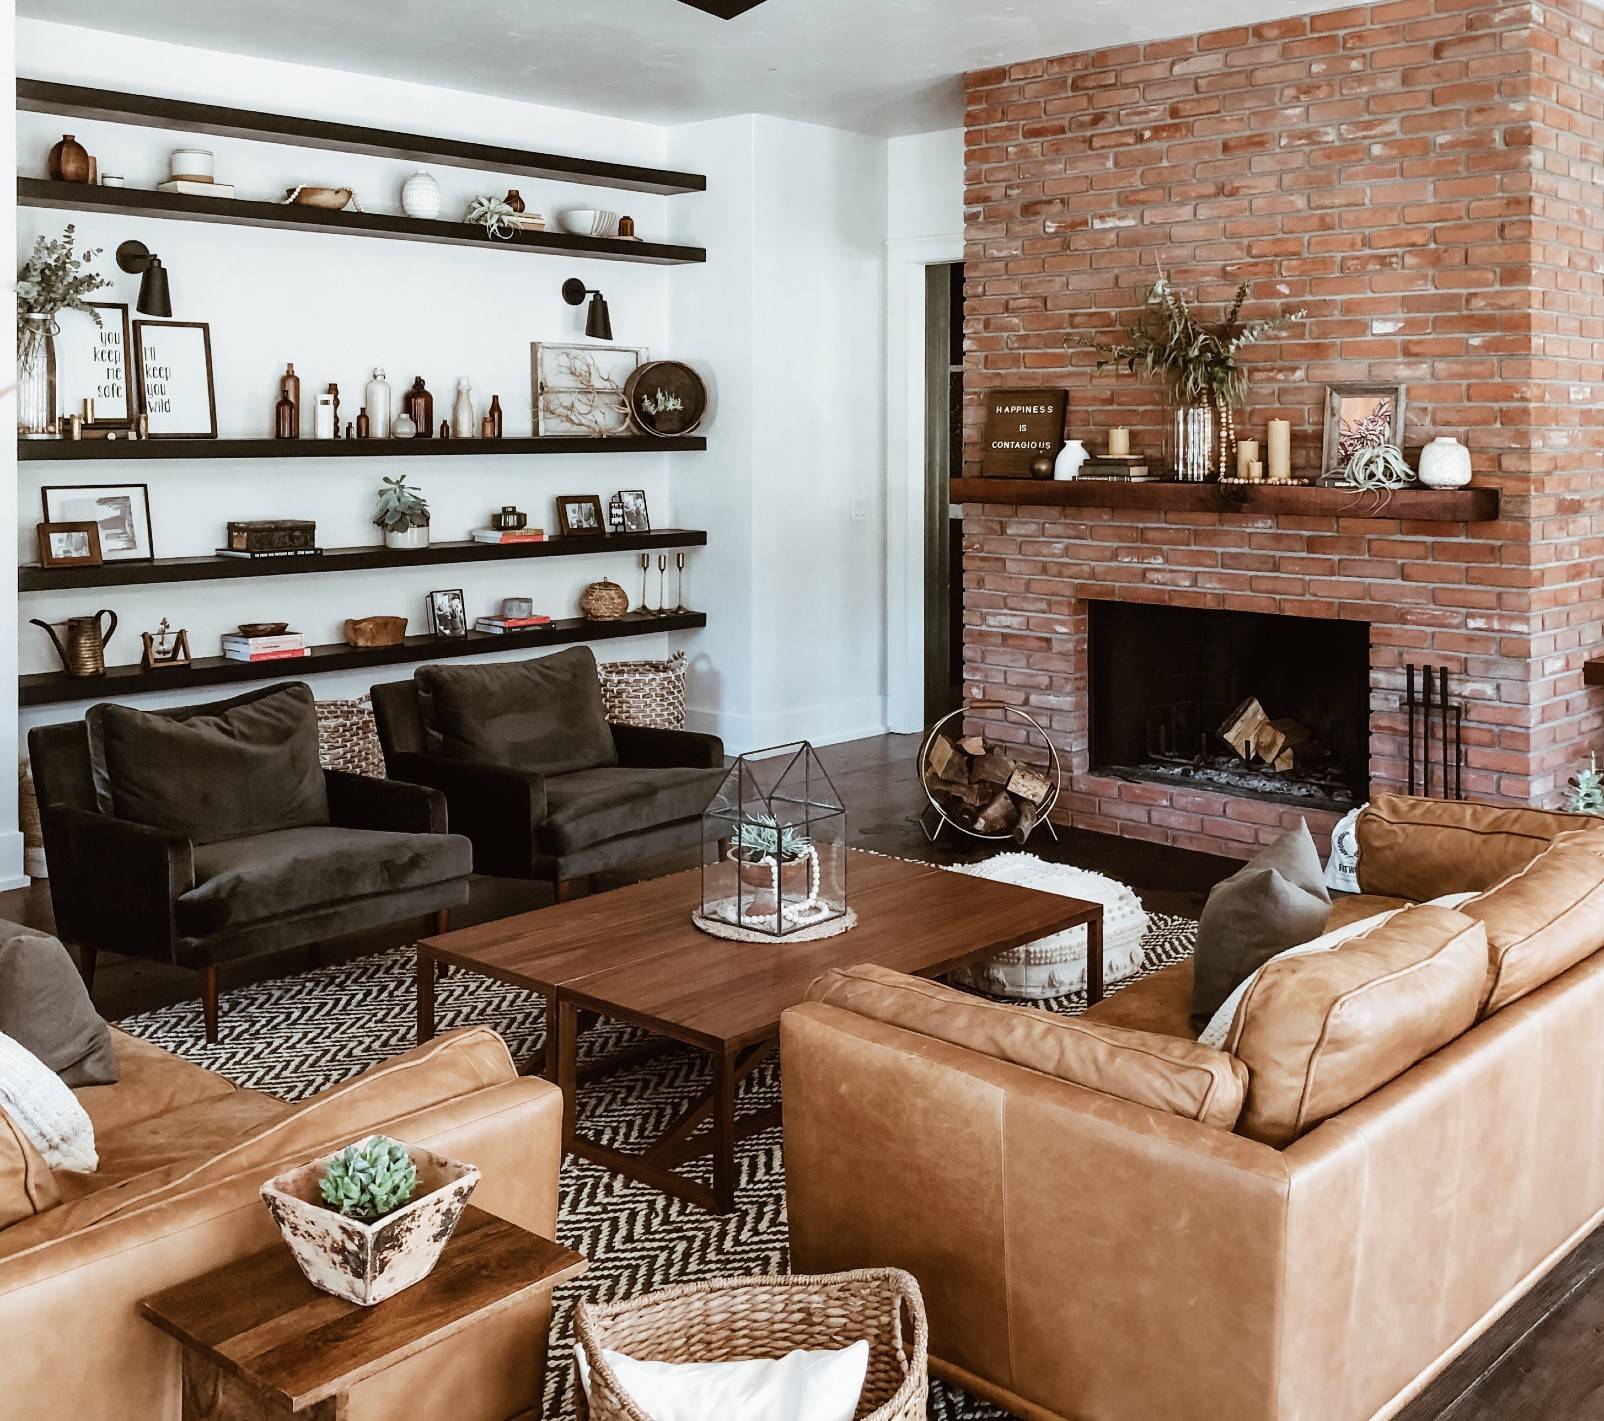 red brick fireplace in living room with leather couches